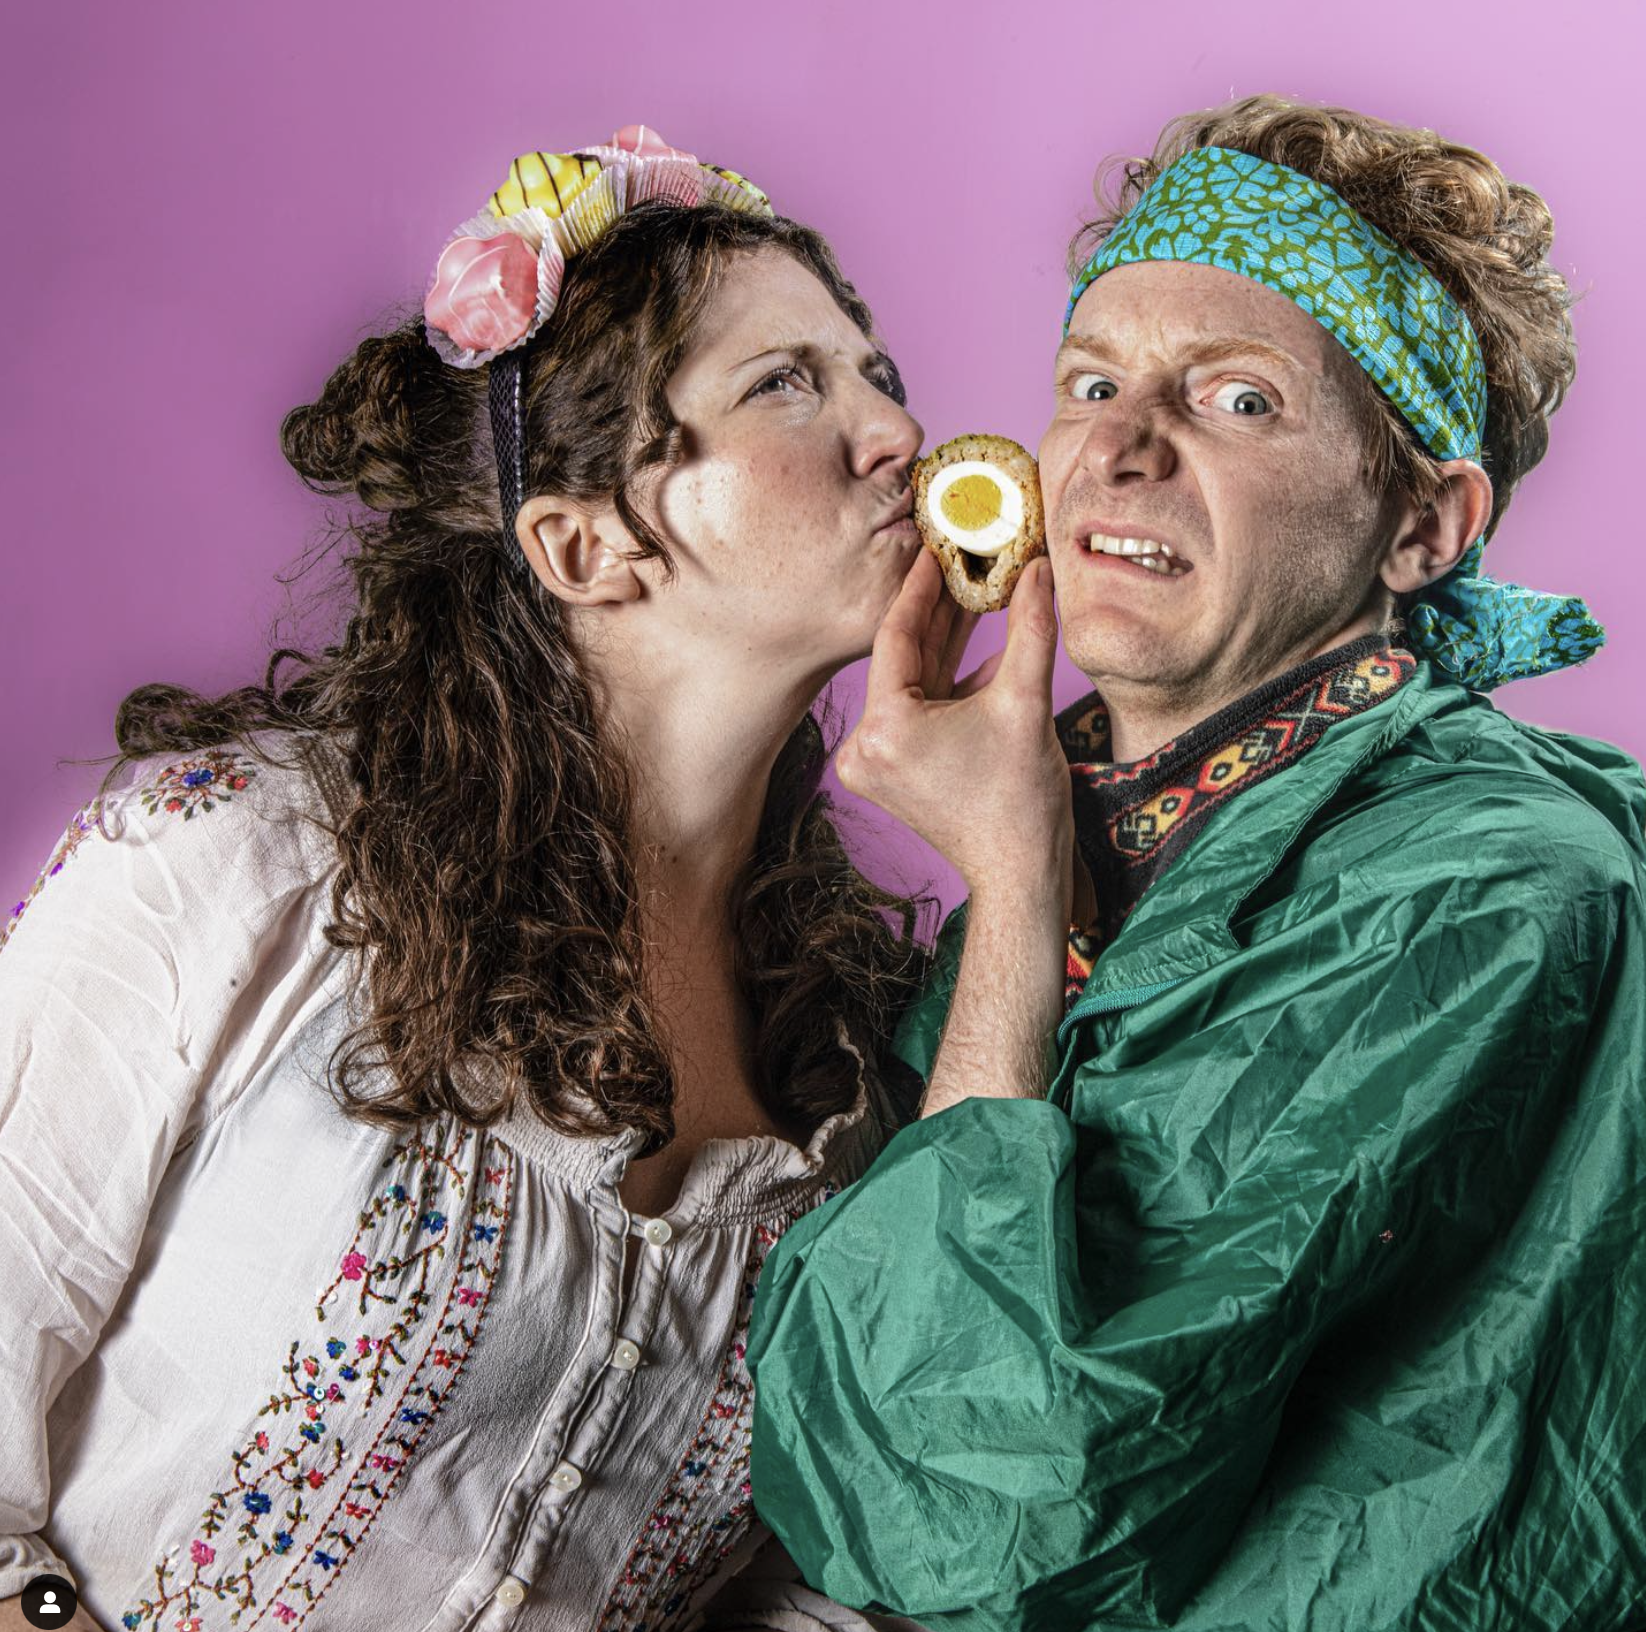 Comedy, classic texts, and side-splitting chaos: we chat to the revered Slapstick Picnic